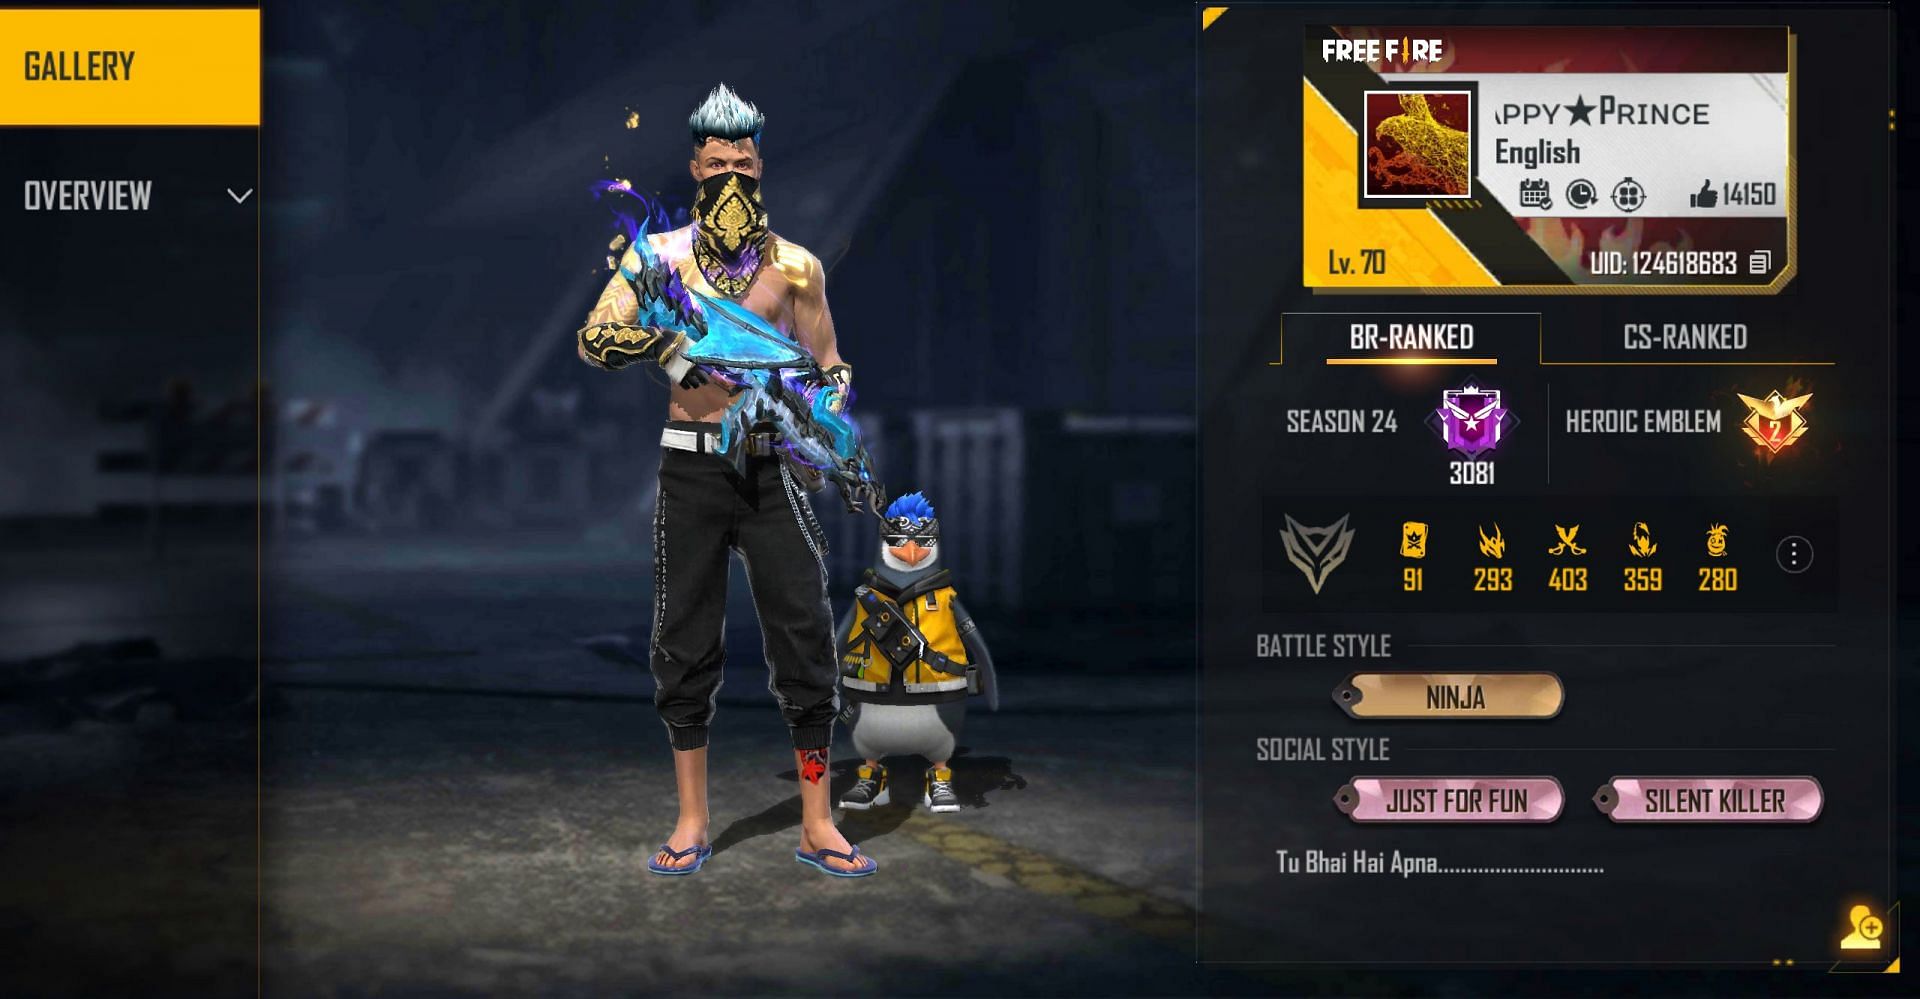 Happy Prince Gaming&#039;s ID in Garena Free Fire (Image via Free Fire)